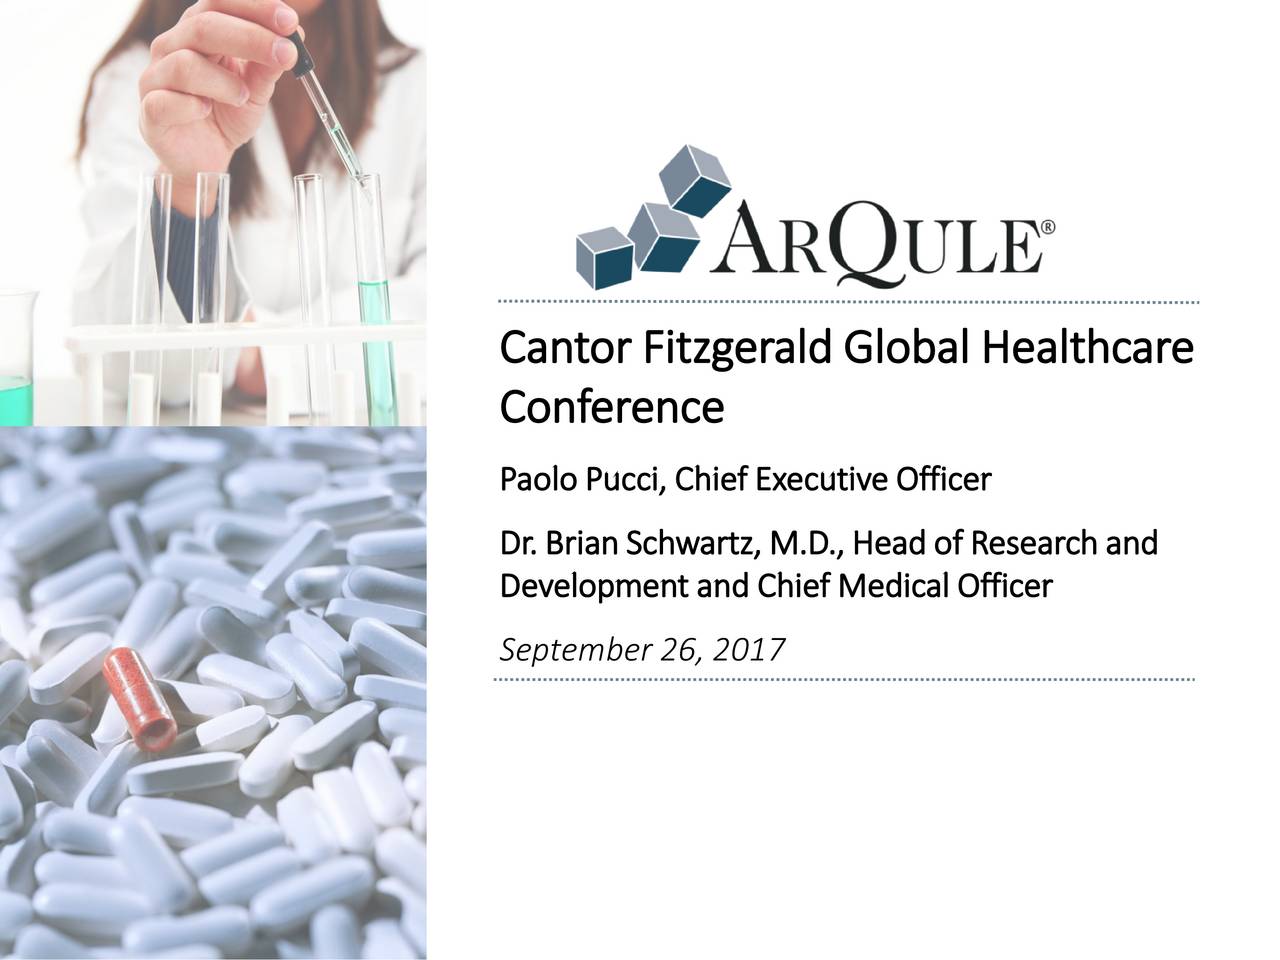 ArQule (ARQL) Presents At Cantor Fitzgerald Global Healthcare